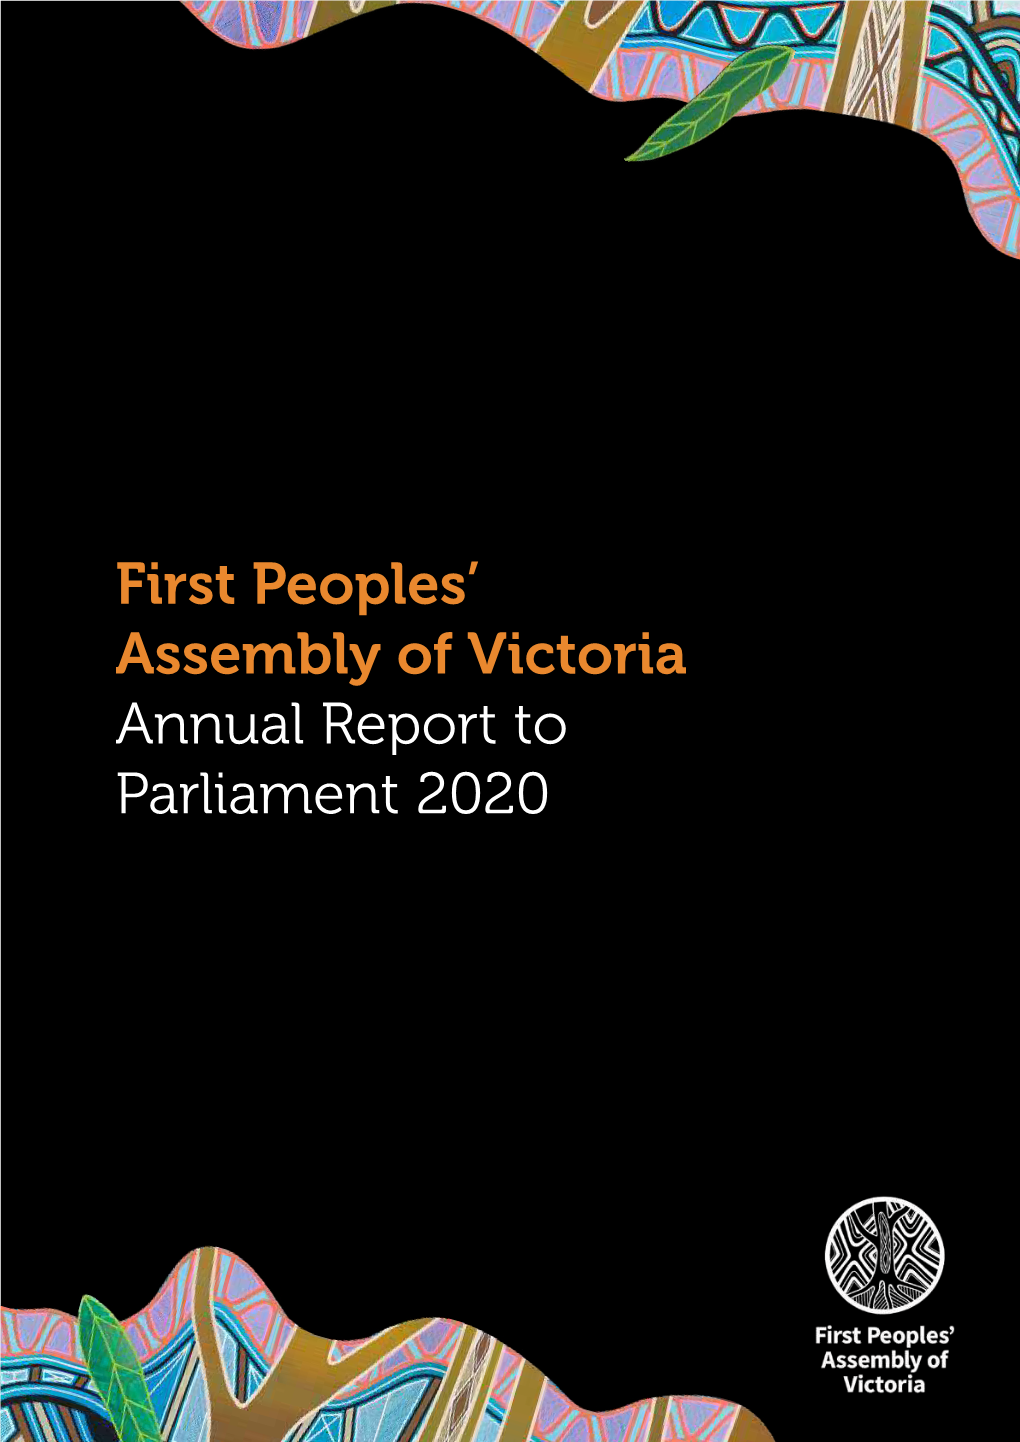 First Peoples' Assembly of Victoria Annual Report to Parliament 2020